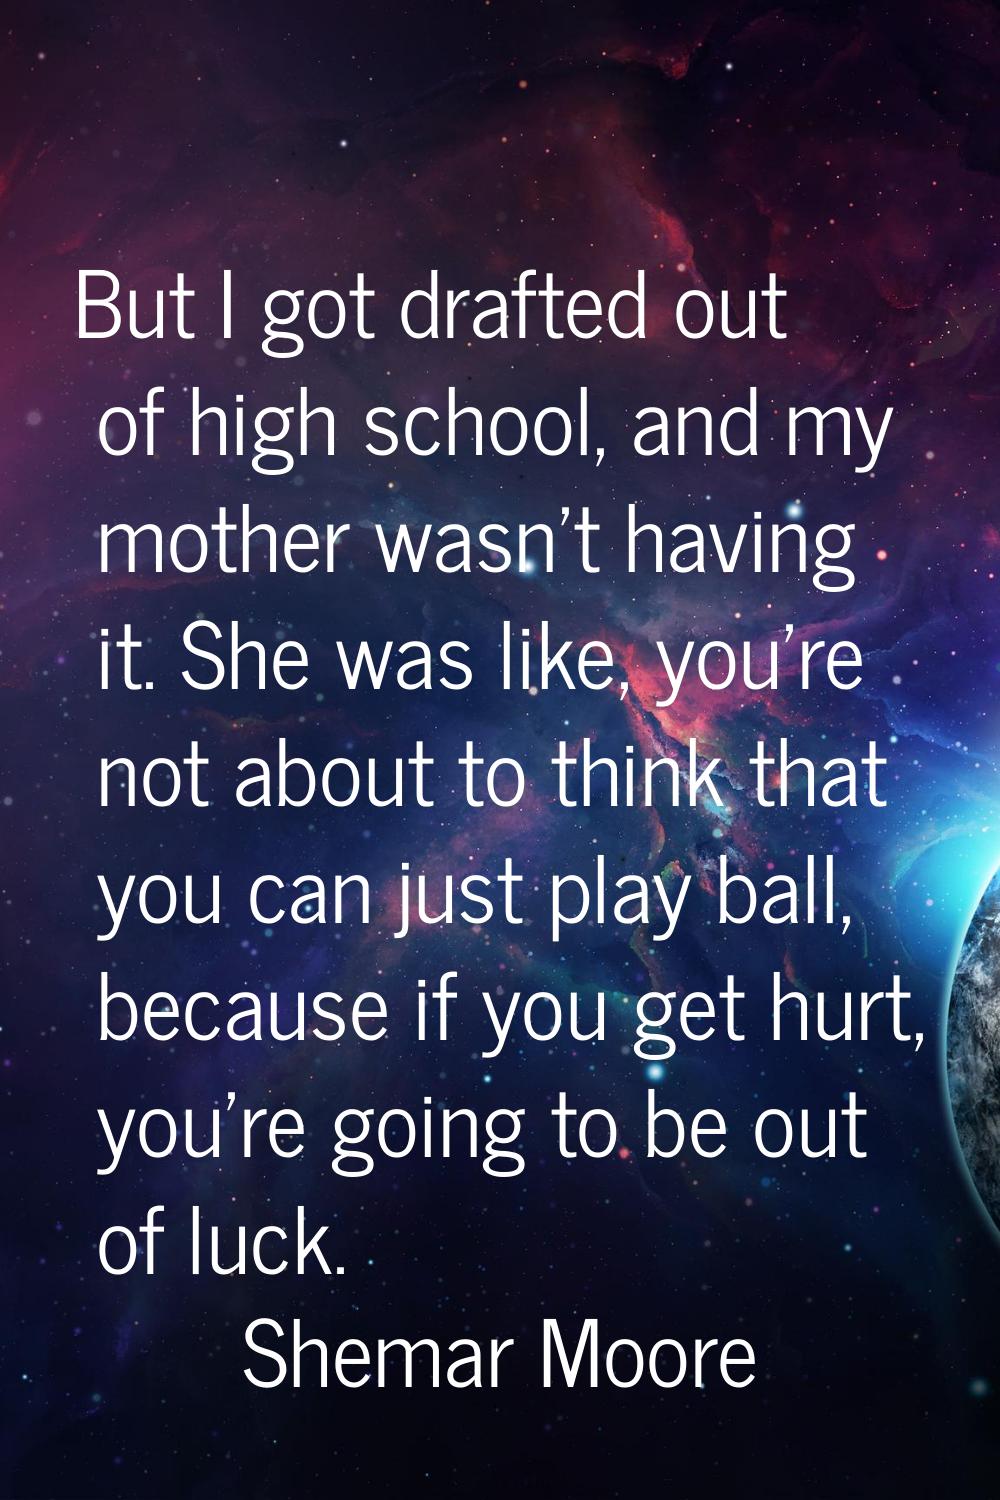 But I got drafted out of high school, and my mother wasn't having it. She was like, you're not abou